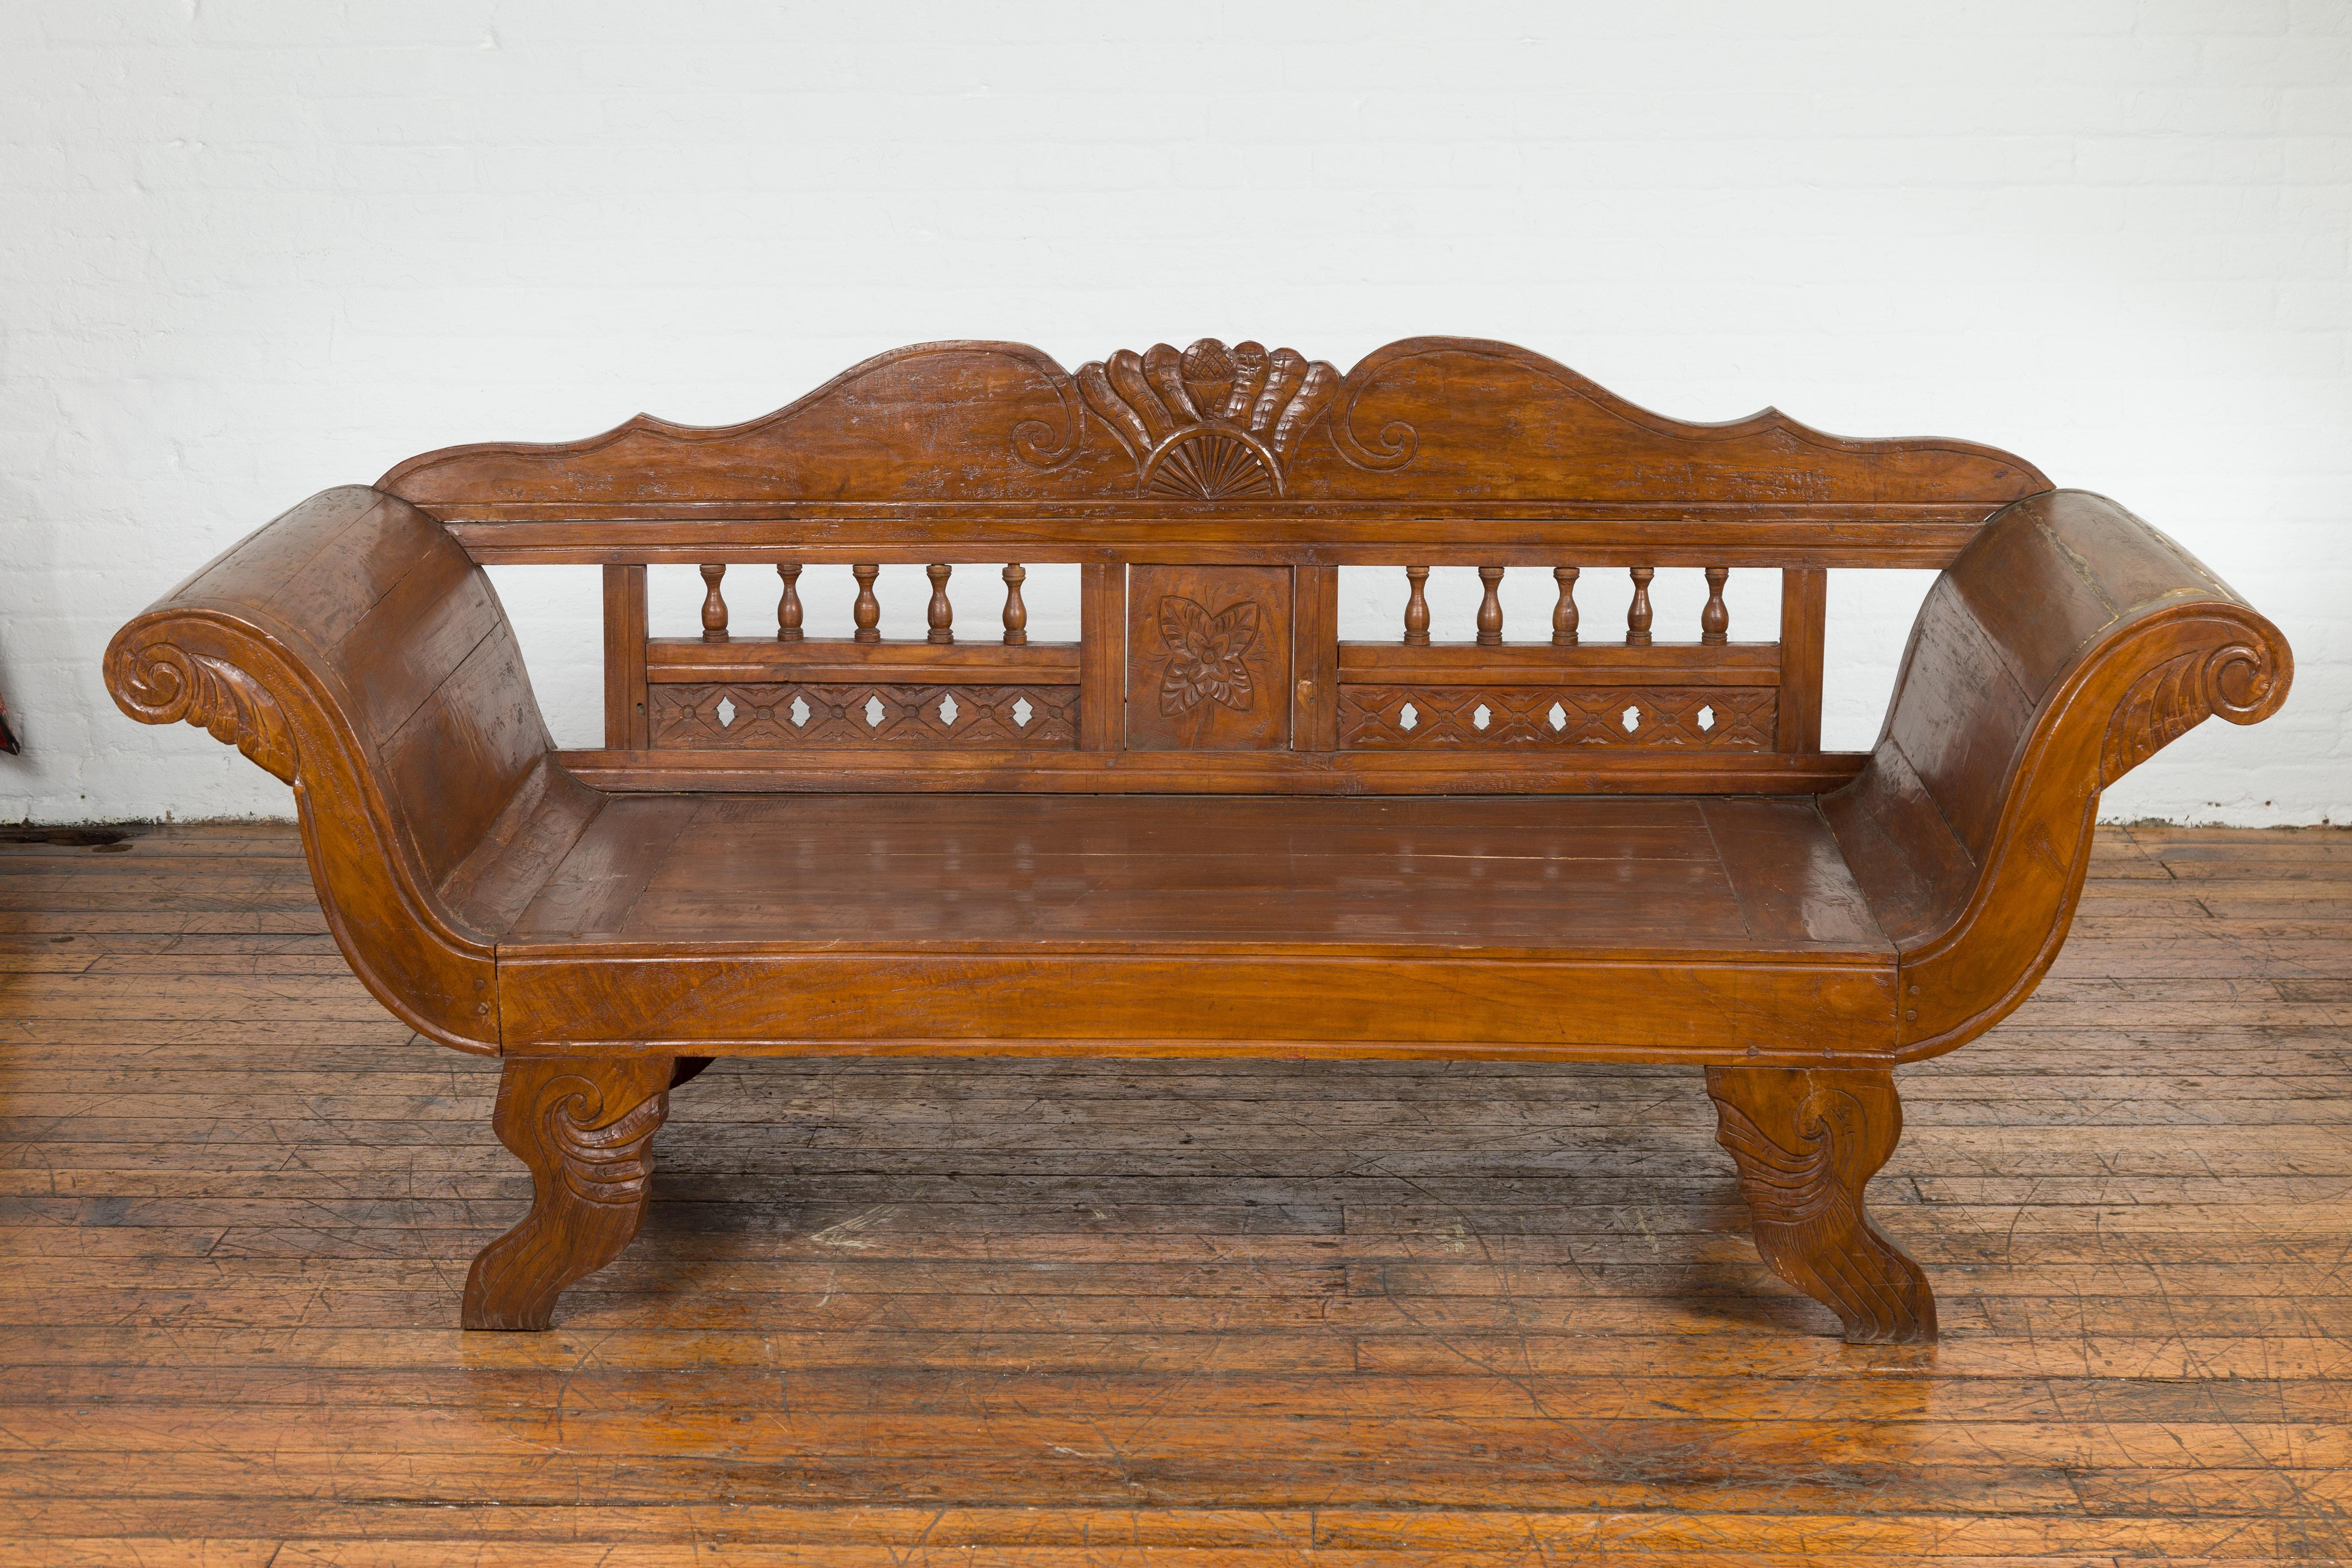 An antique Javanese teak wood plantation settee from the early 20th century, with carved back, large out-scrolling arms and curving legs. Created on the Island of Java during the early years of the 20th century, this teak wood settee attracts our